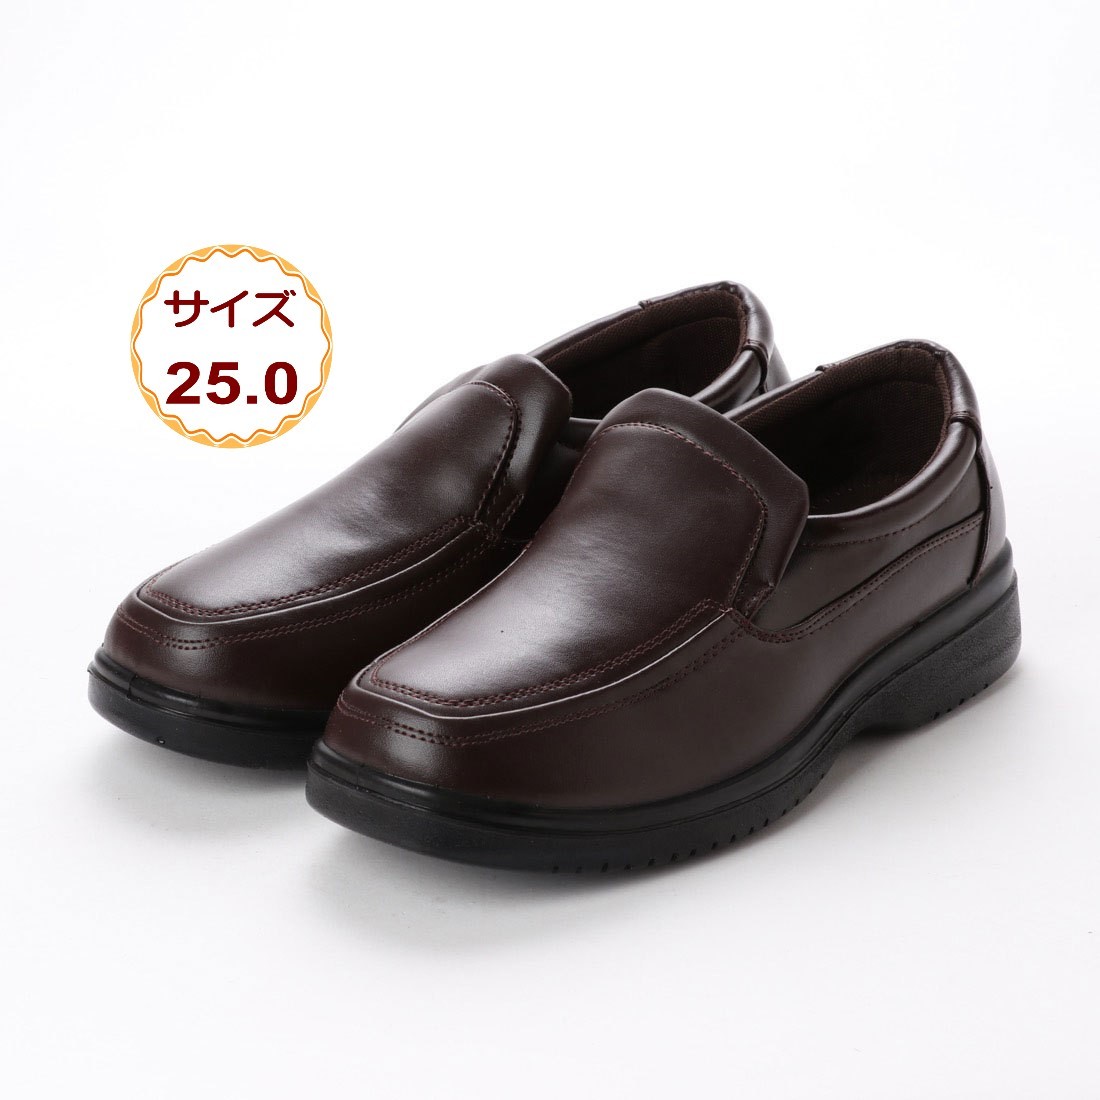 25.0cm Brown tea outlet men's casual shoes Loafer slip-on shoes commuting wide width light weight gentleman 15108-brn-250